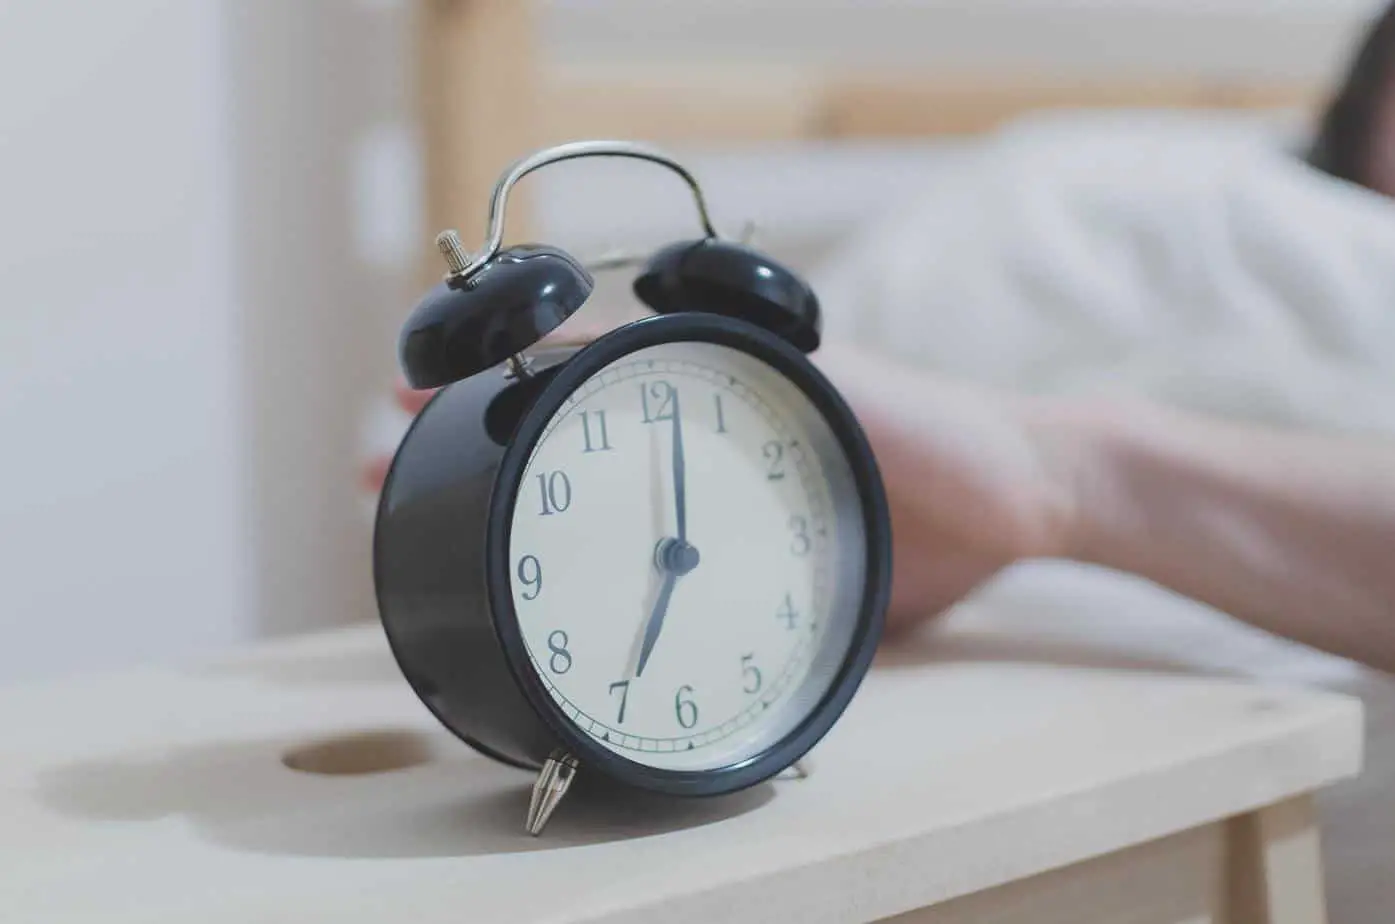 Don't let your new comfortable mattress make you late for work. Here are the best alarm clock apps for heavy sleepers.